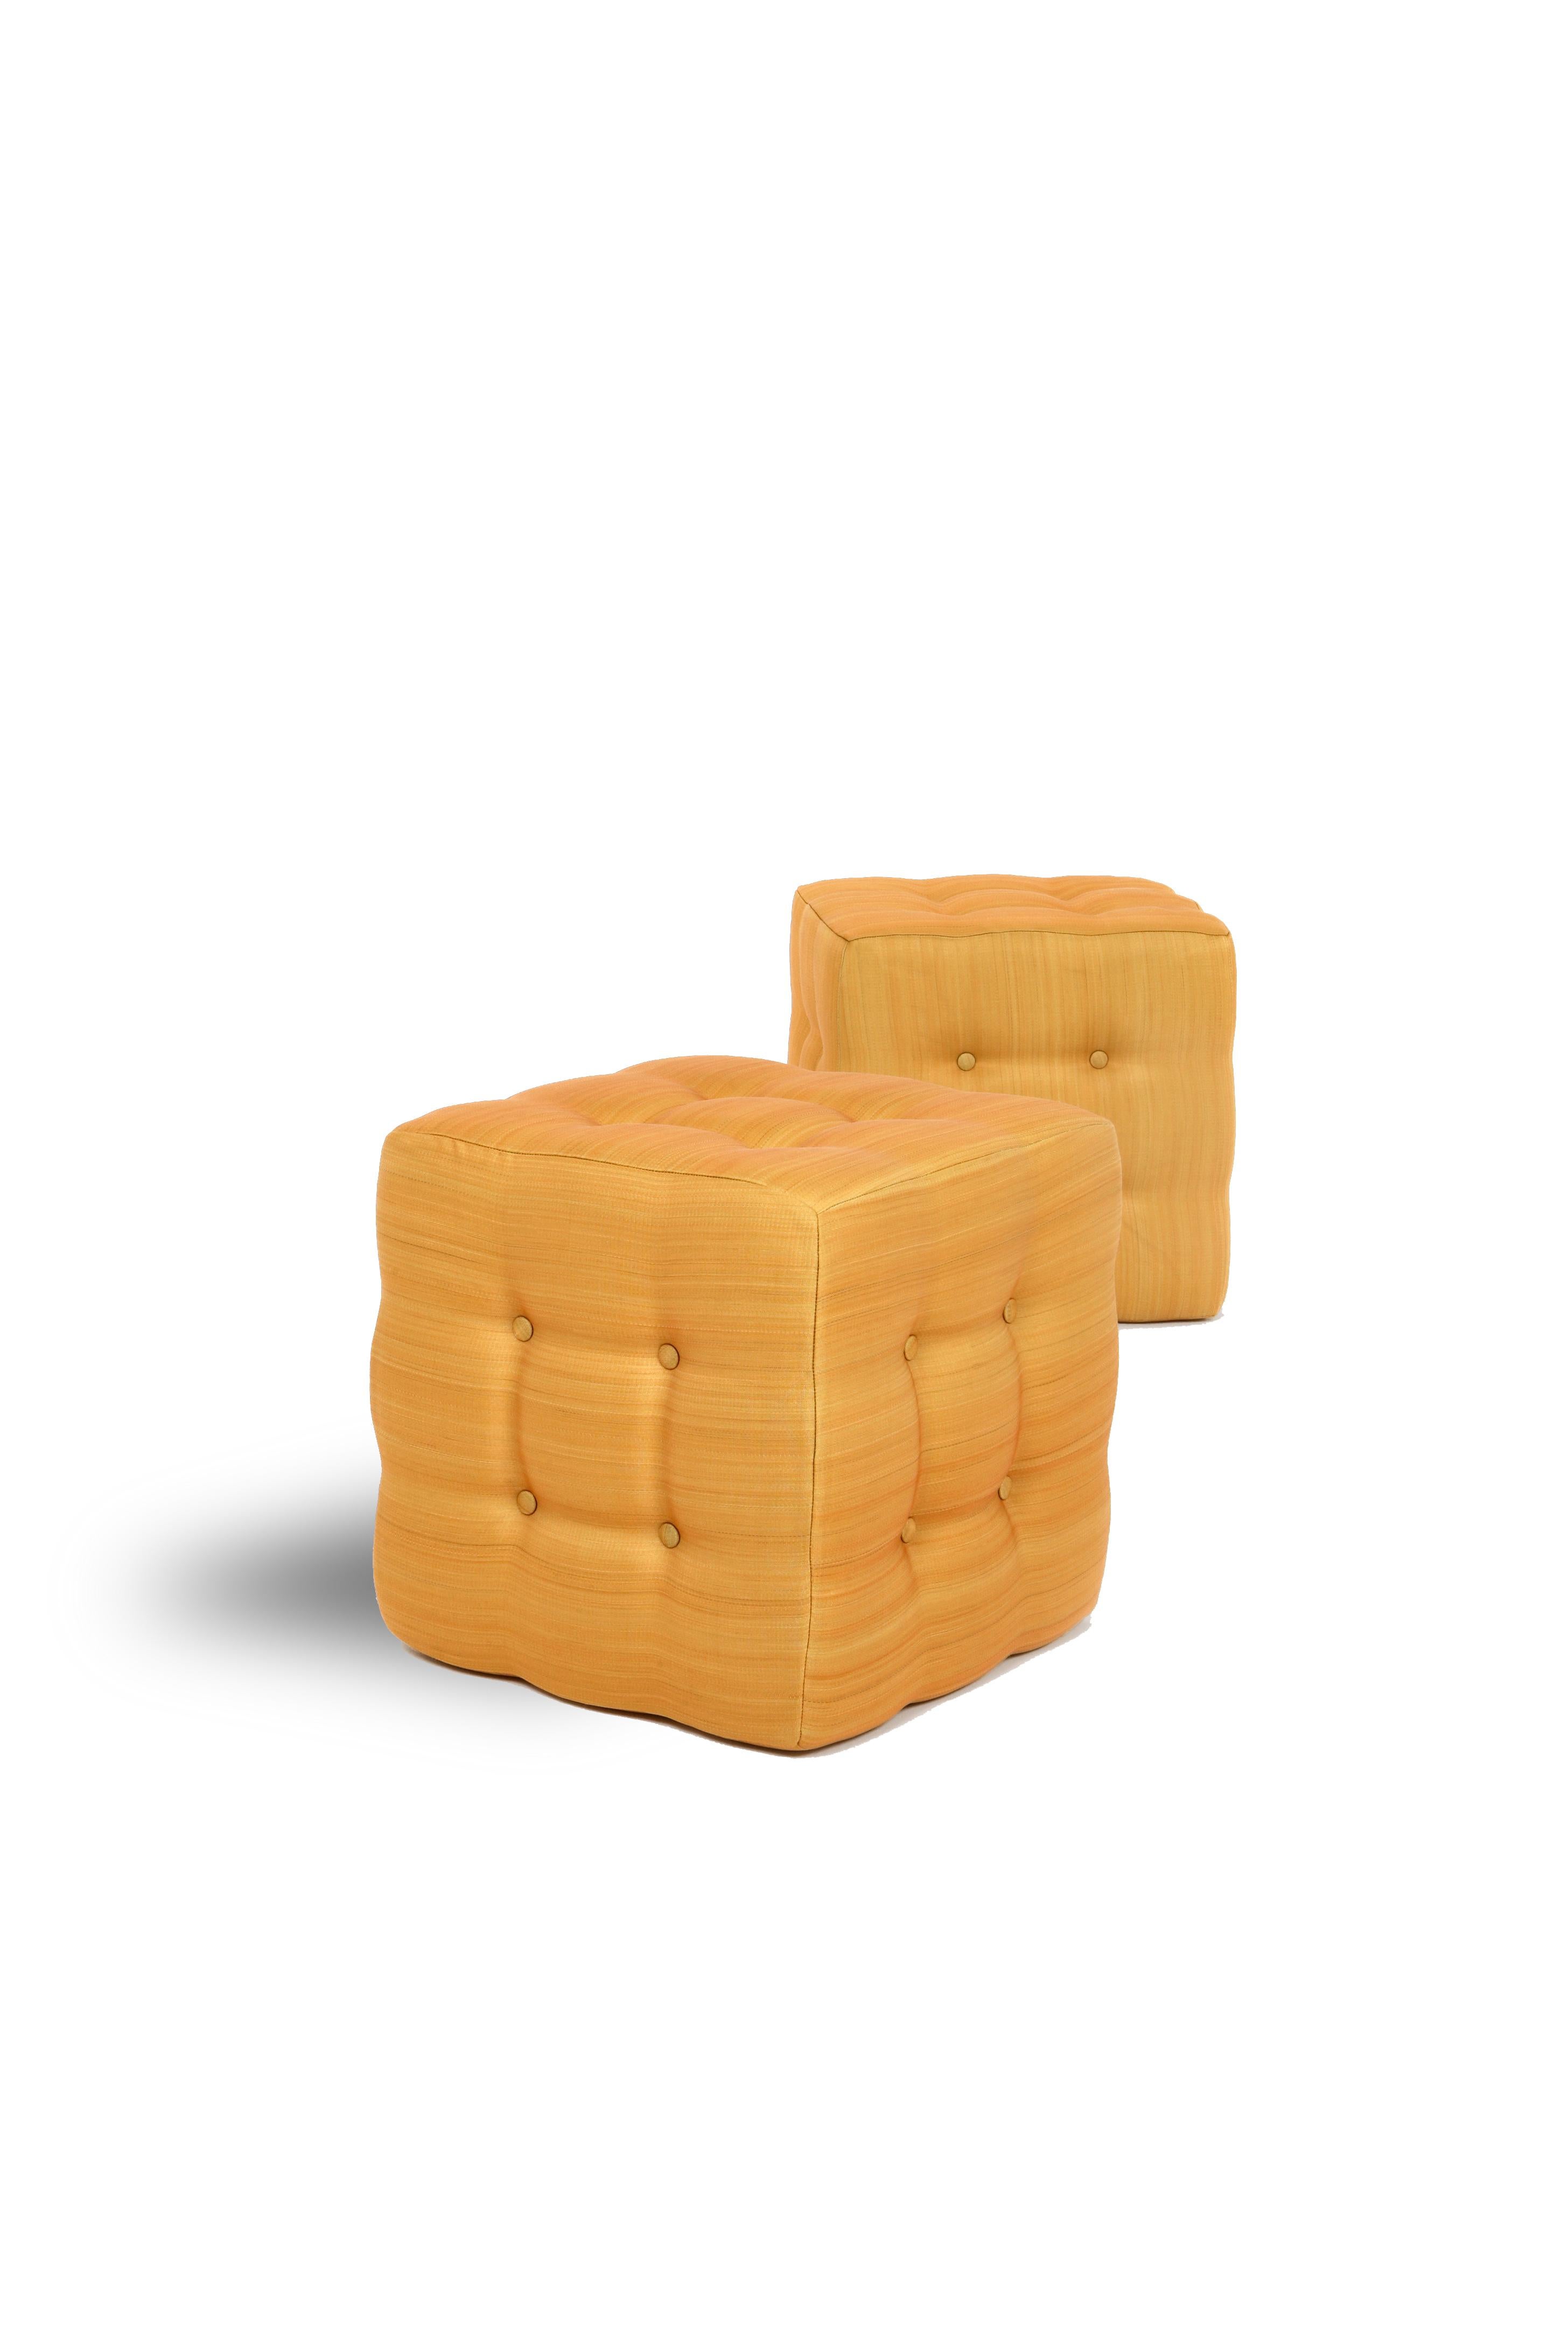 Hand-Crafted Marien Cube